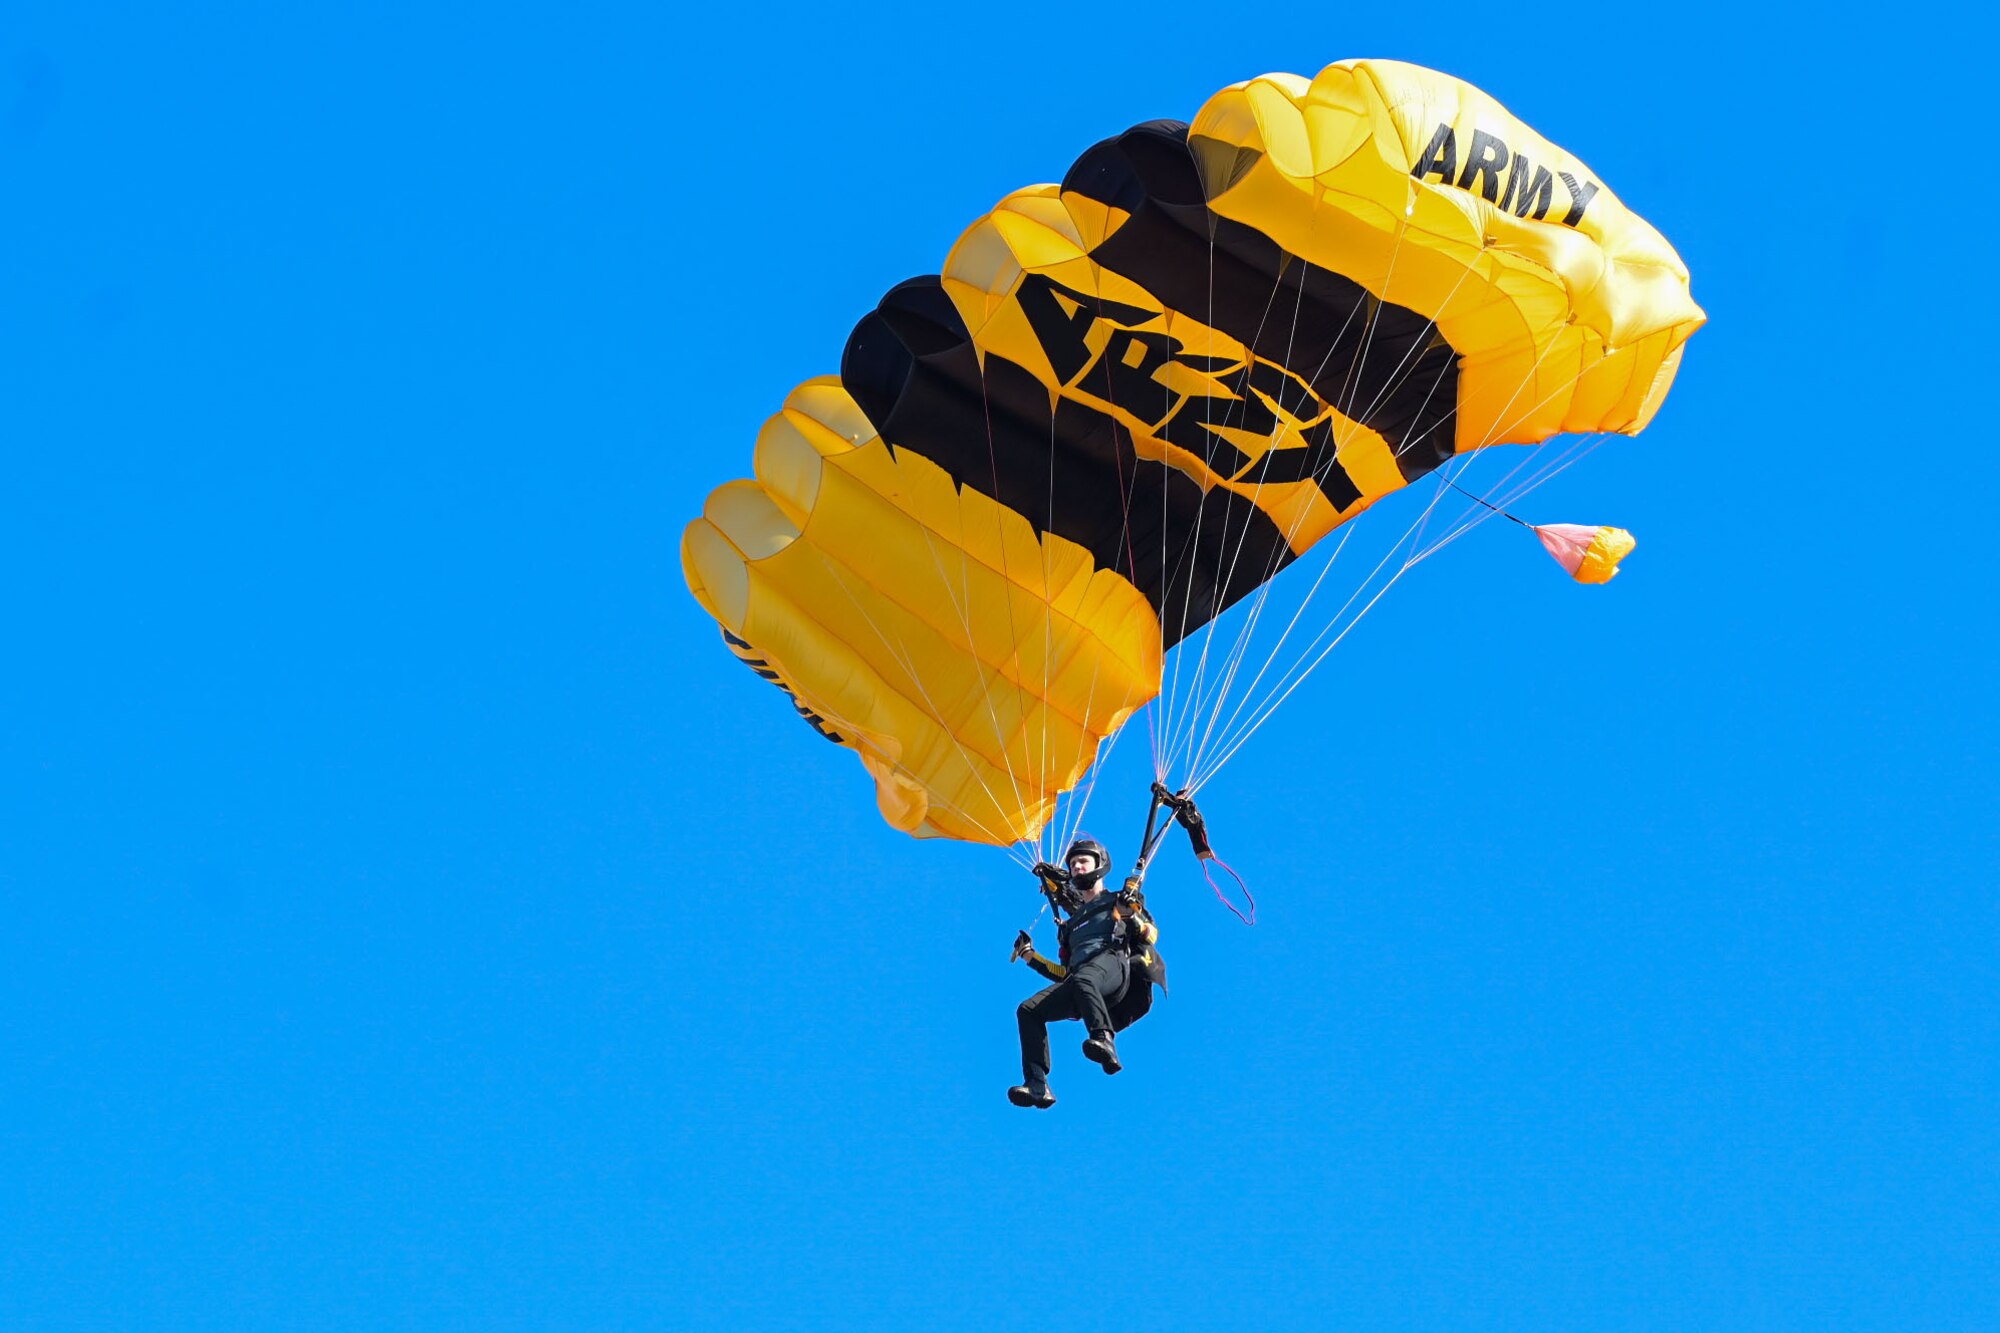 Golden knight parachuting in the air